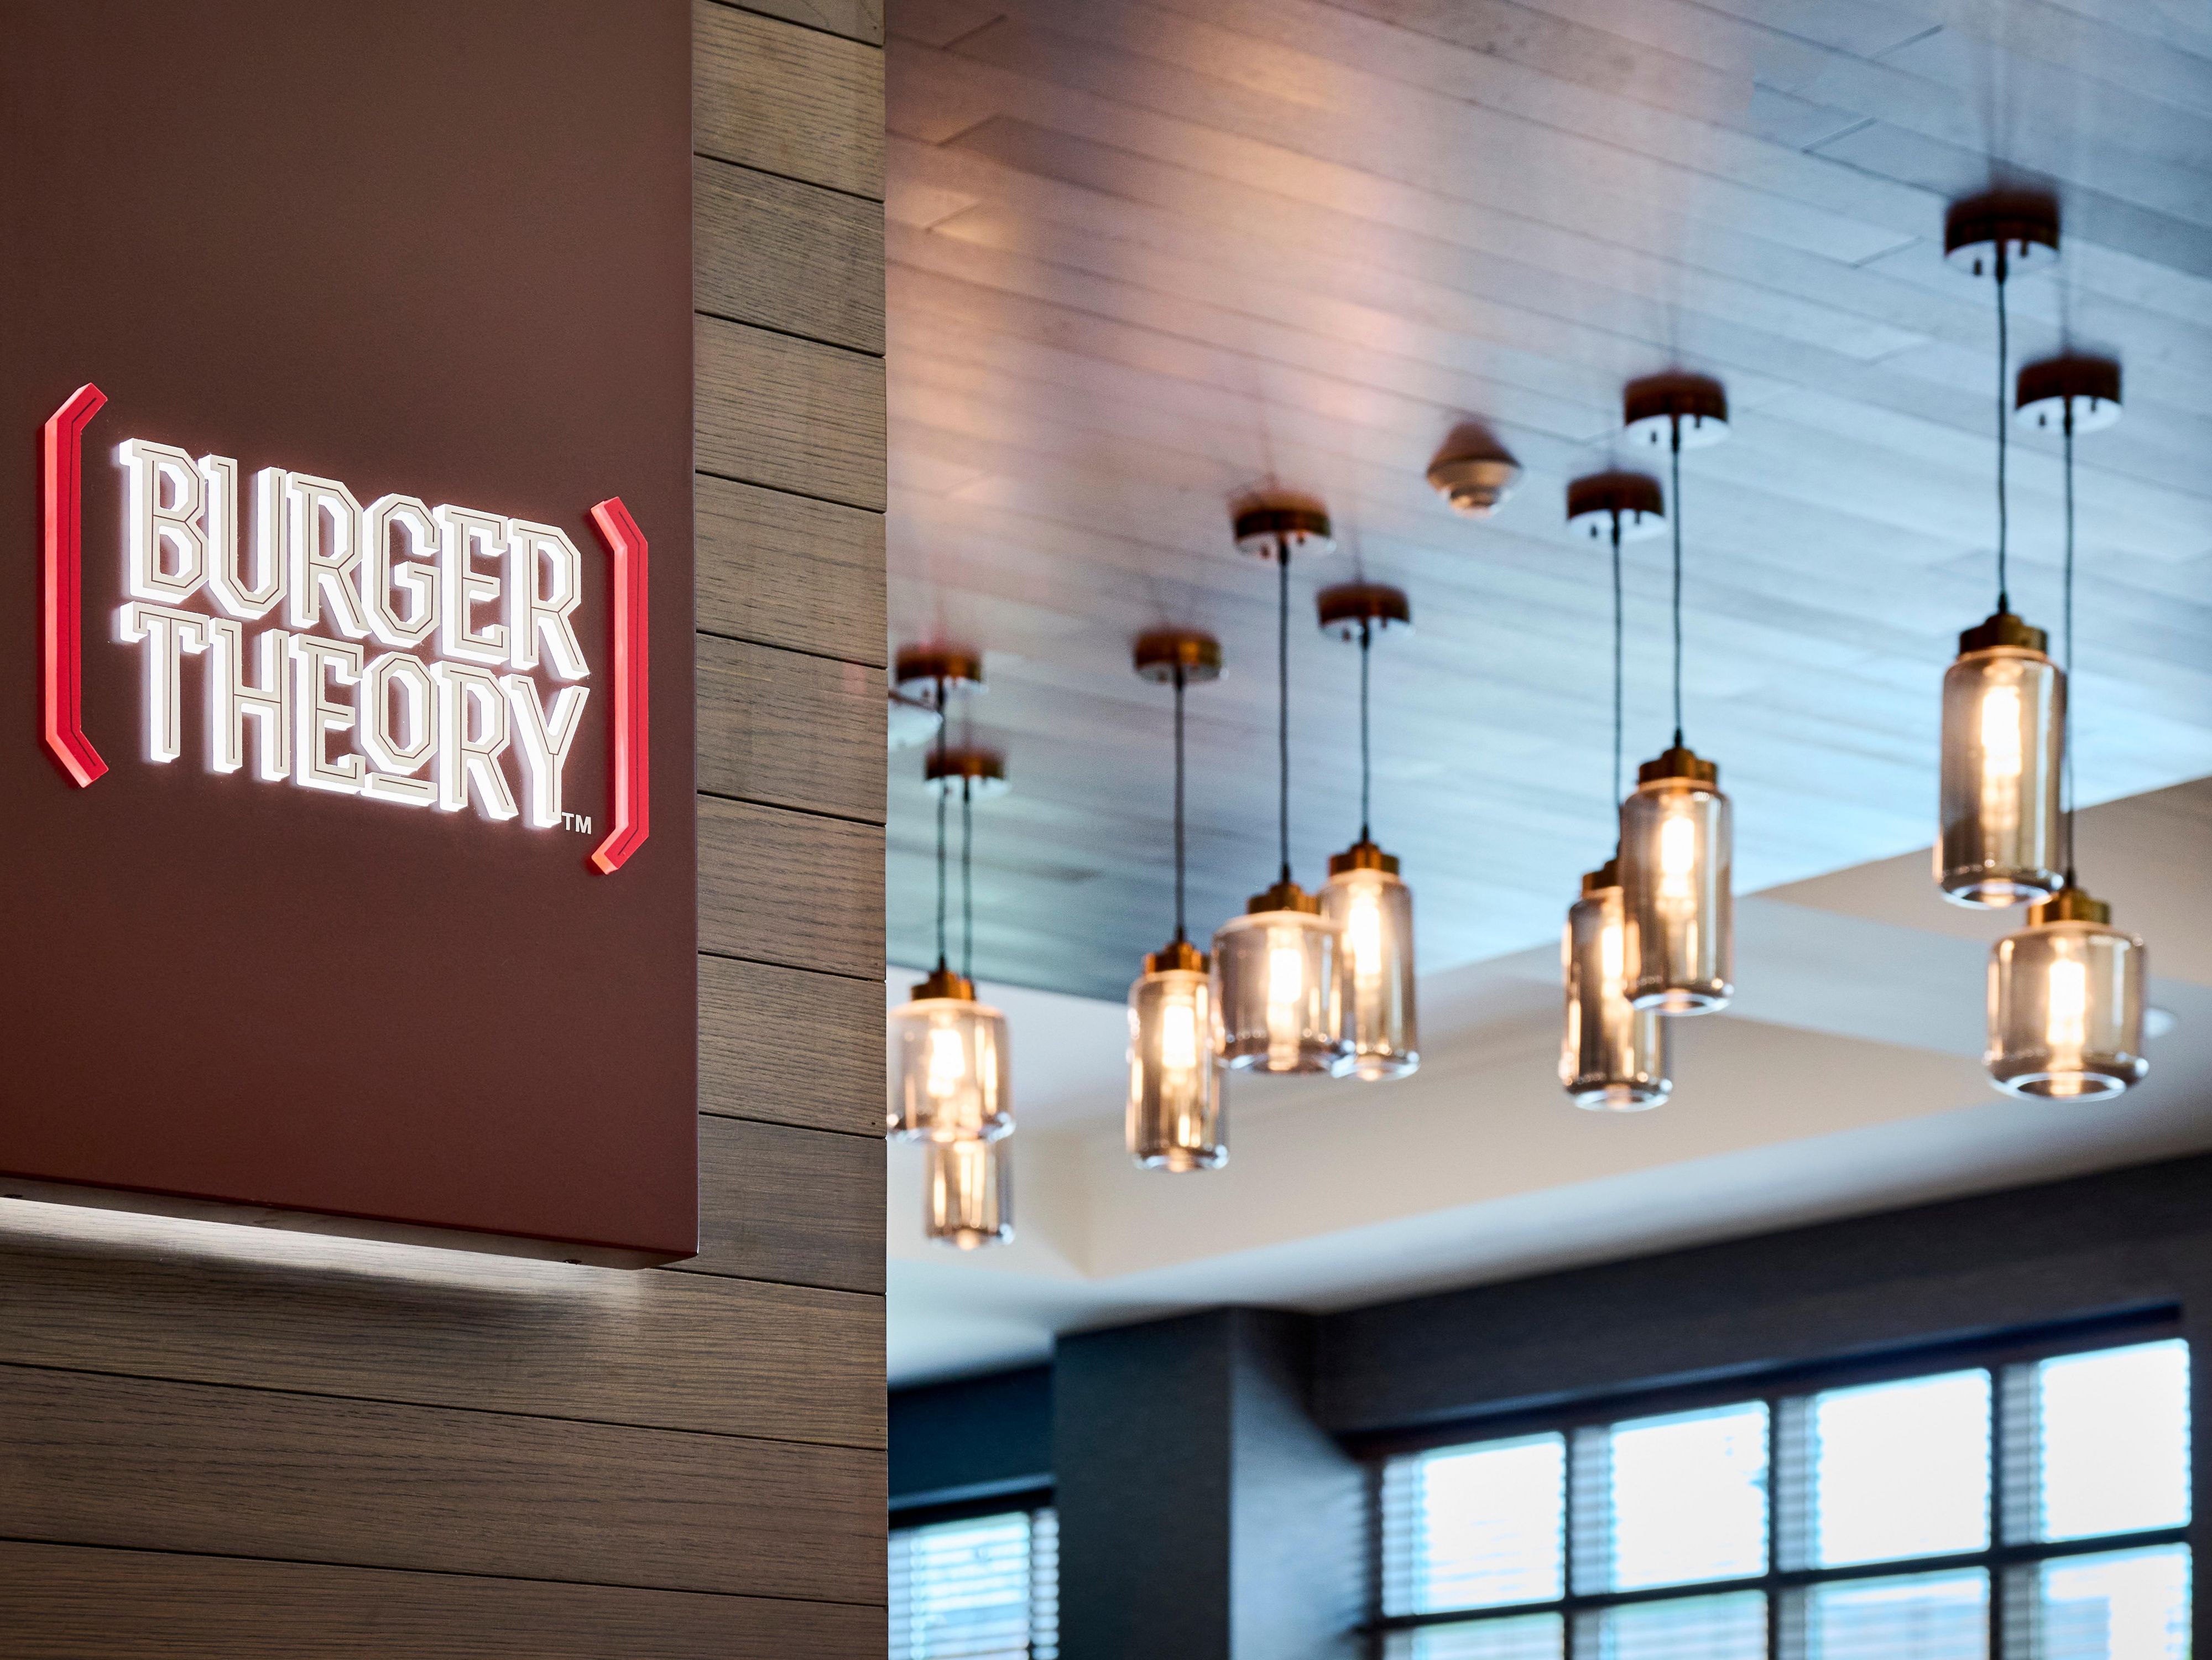 The Burger Theory  Restaurant now offers the option for our overnight guests to order great food from their menu and pick up at our New Concierge Counter.  Please contact us for details.